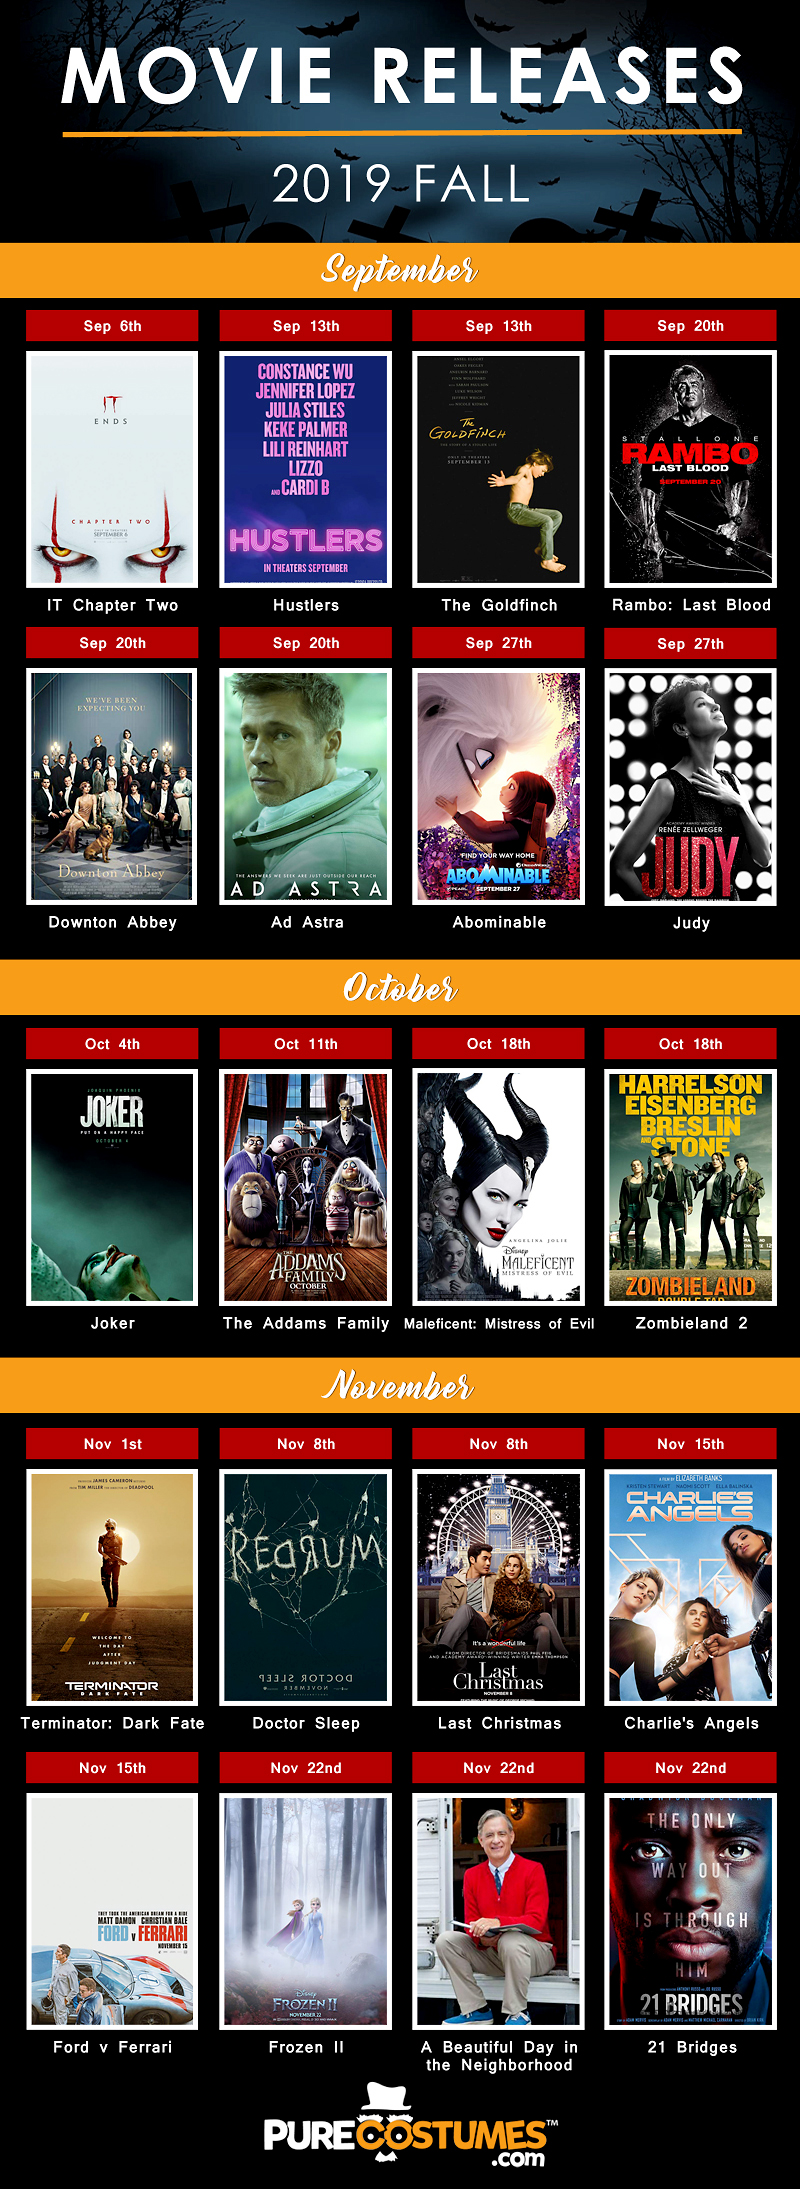 Fall 2019 Movie Releases Infographic